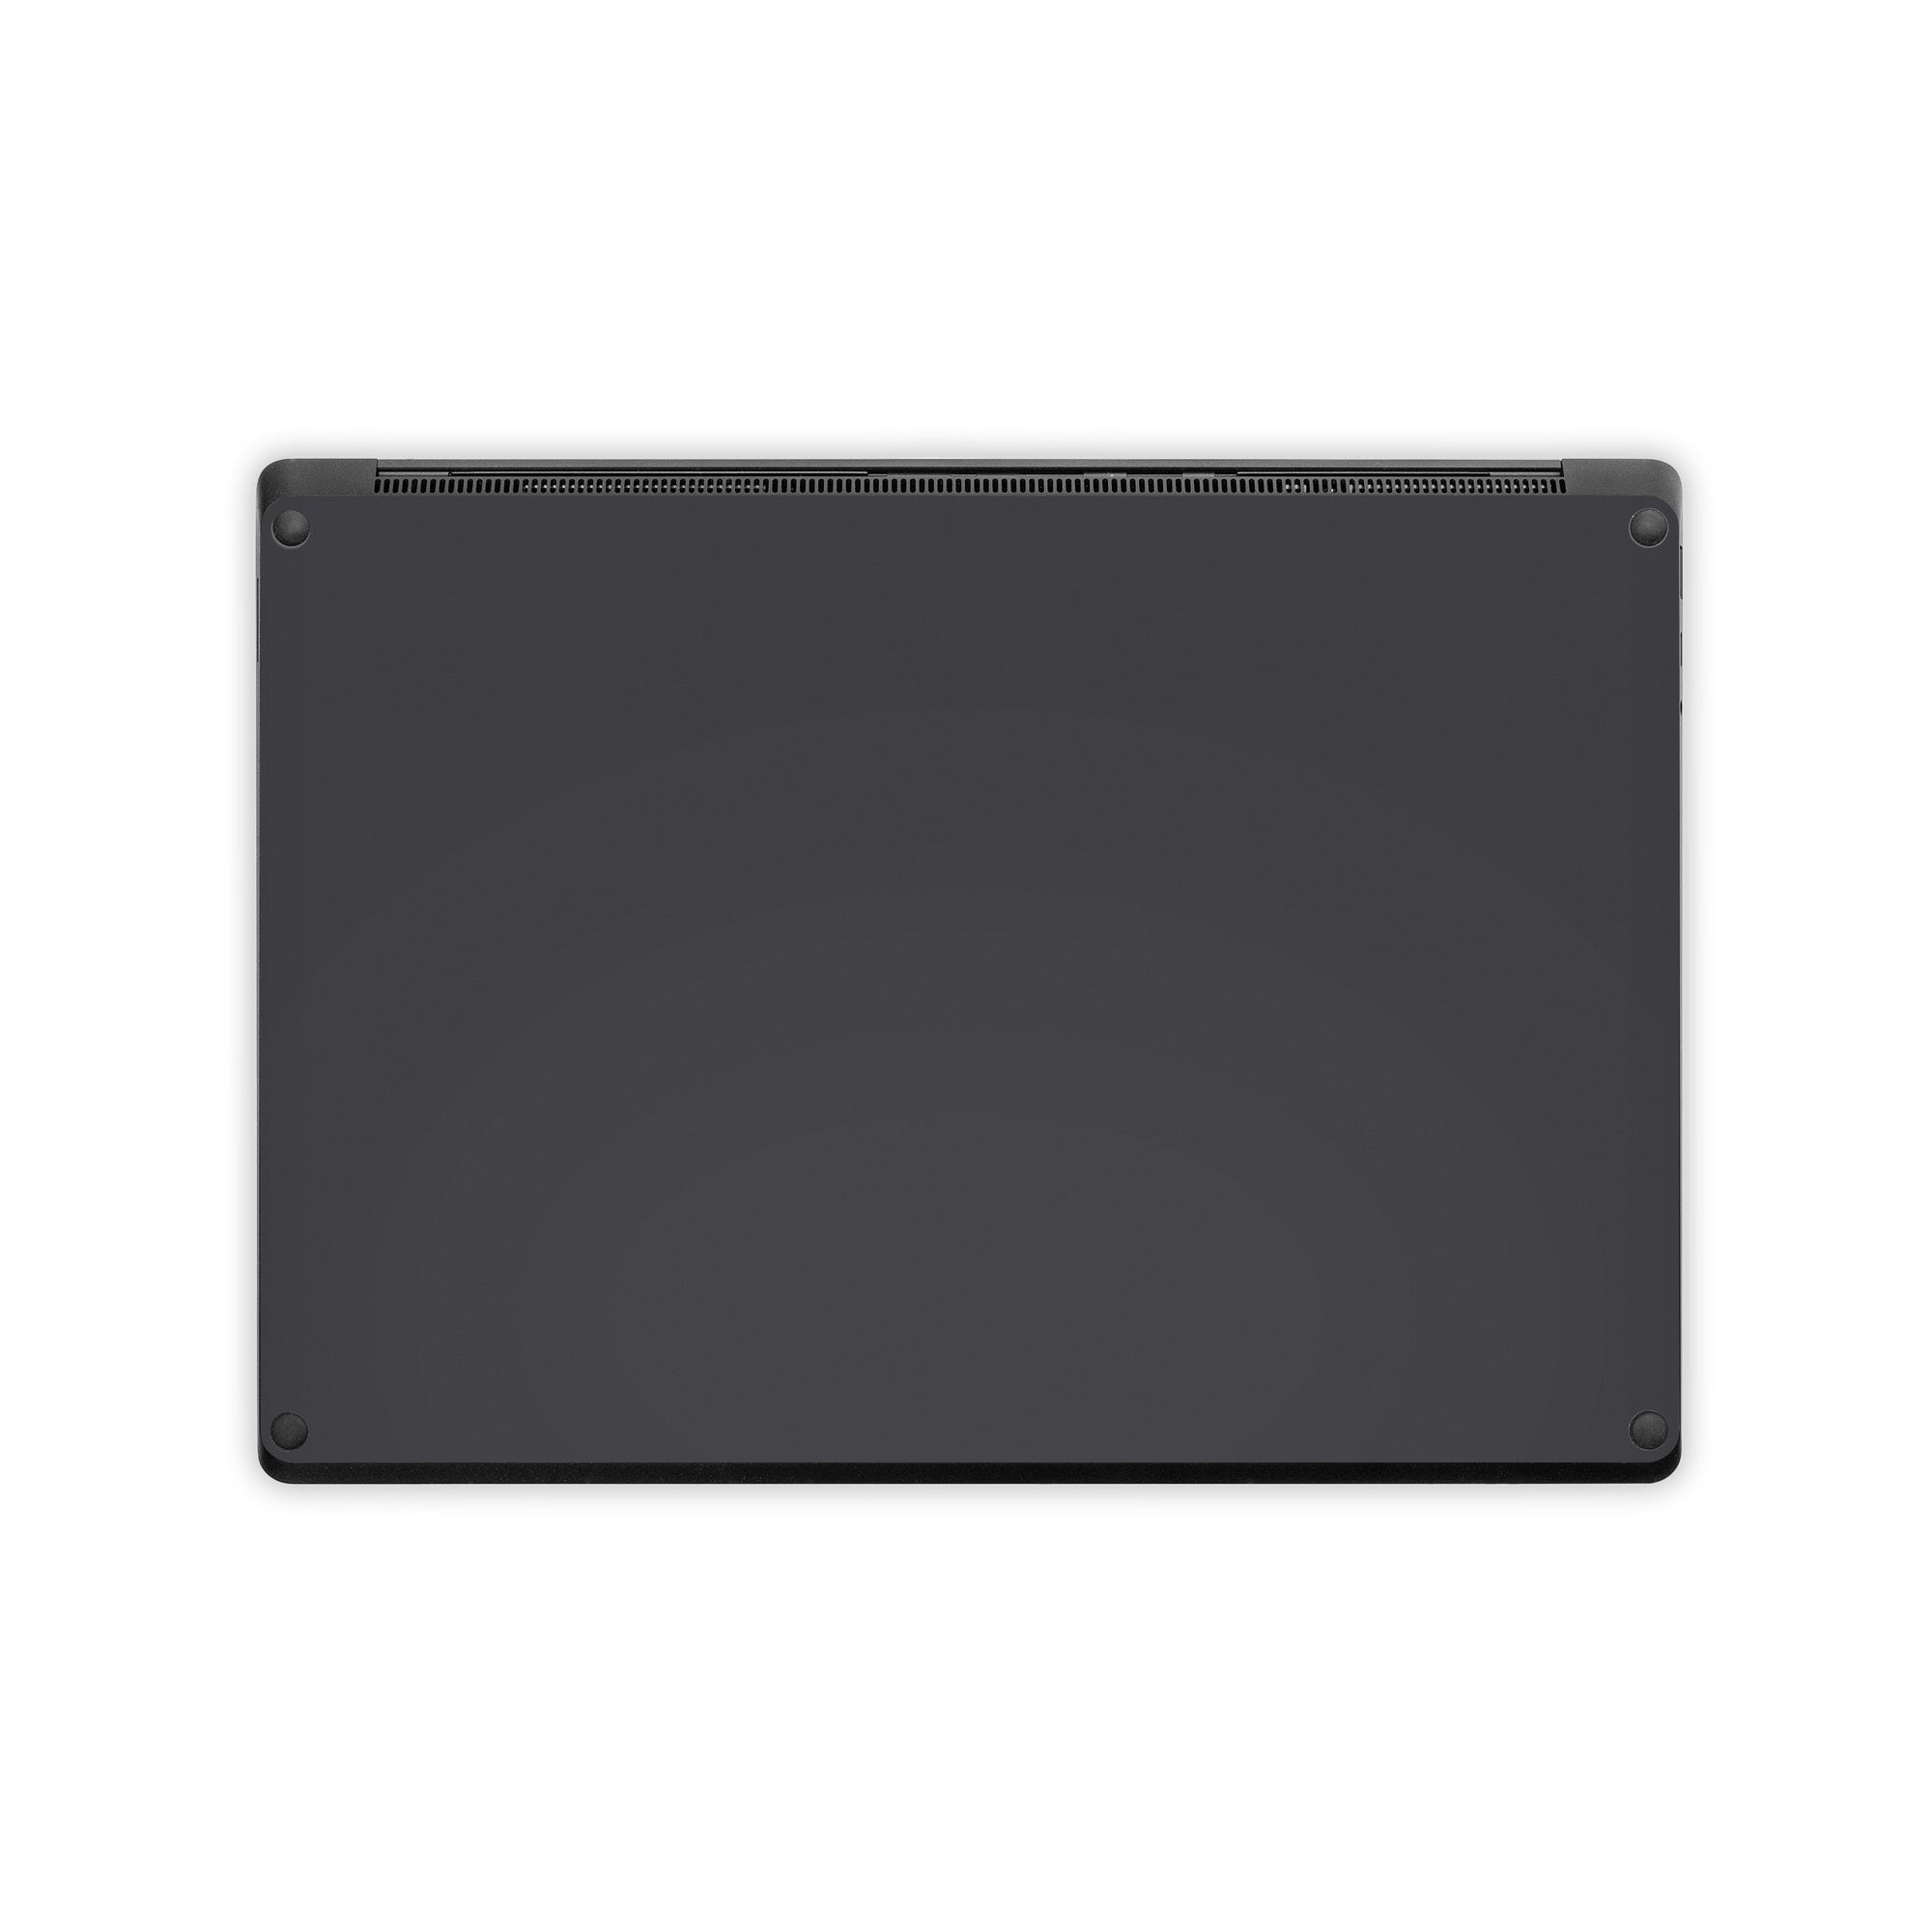 Solid State Slate Grey - Microsoft Surface Laptop Skin